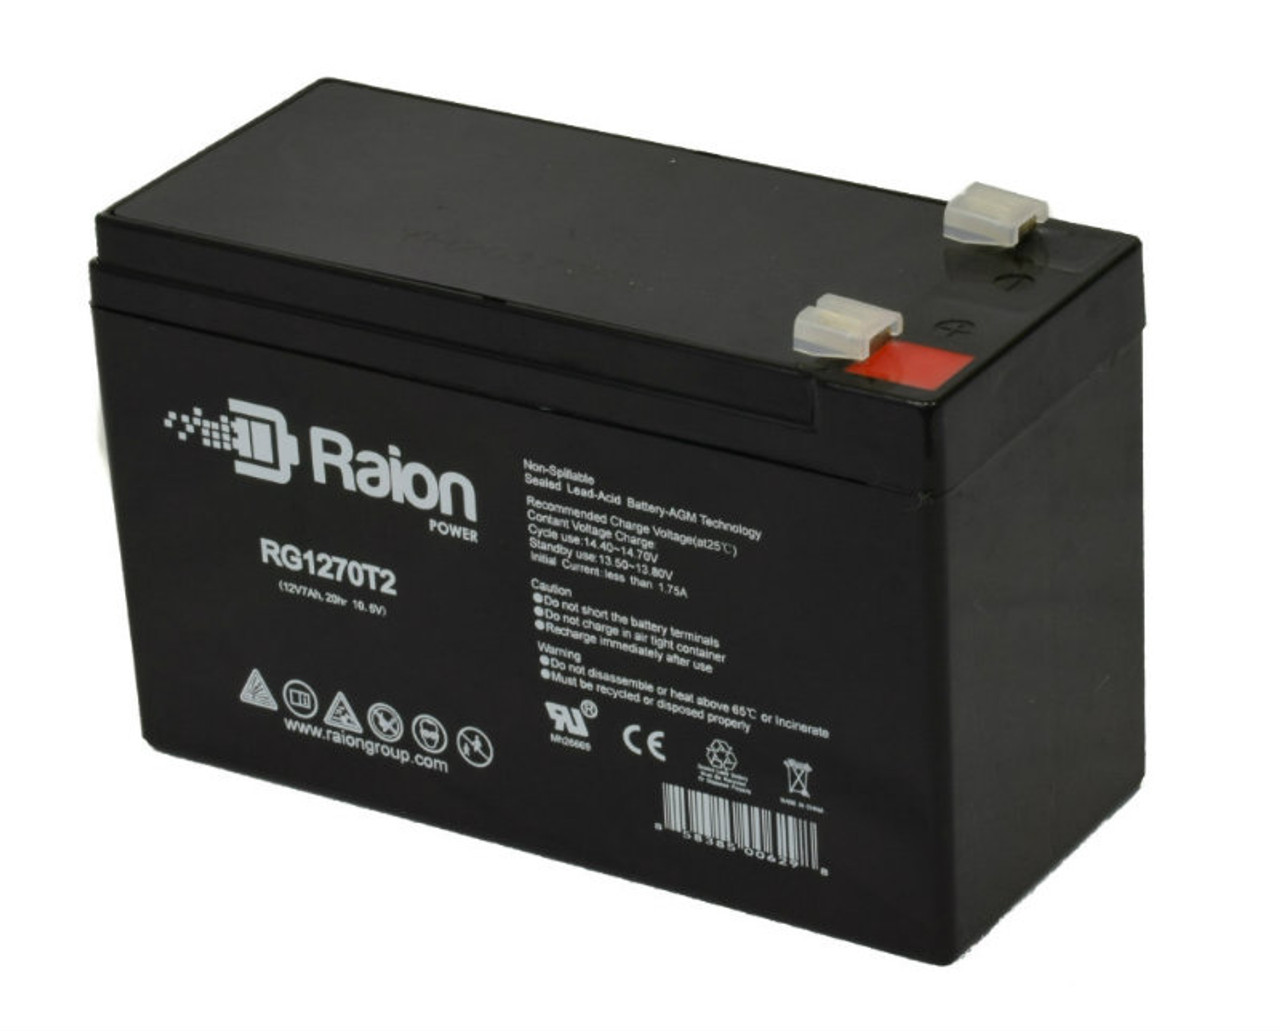 Raion Power RG1270T1 12V 7Ah Non-Spillable Replacement Battery for Pustun PST7-12 F1